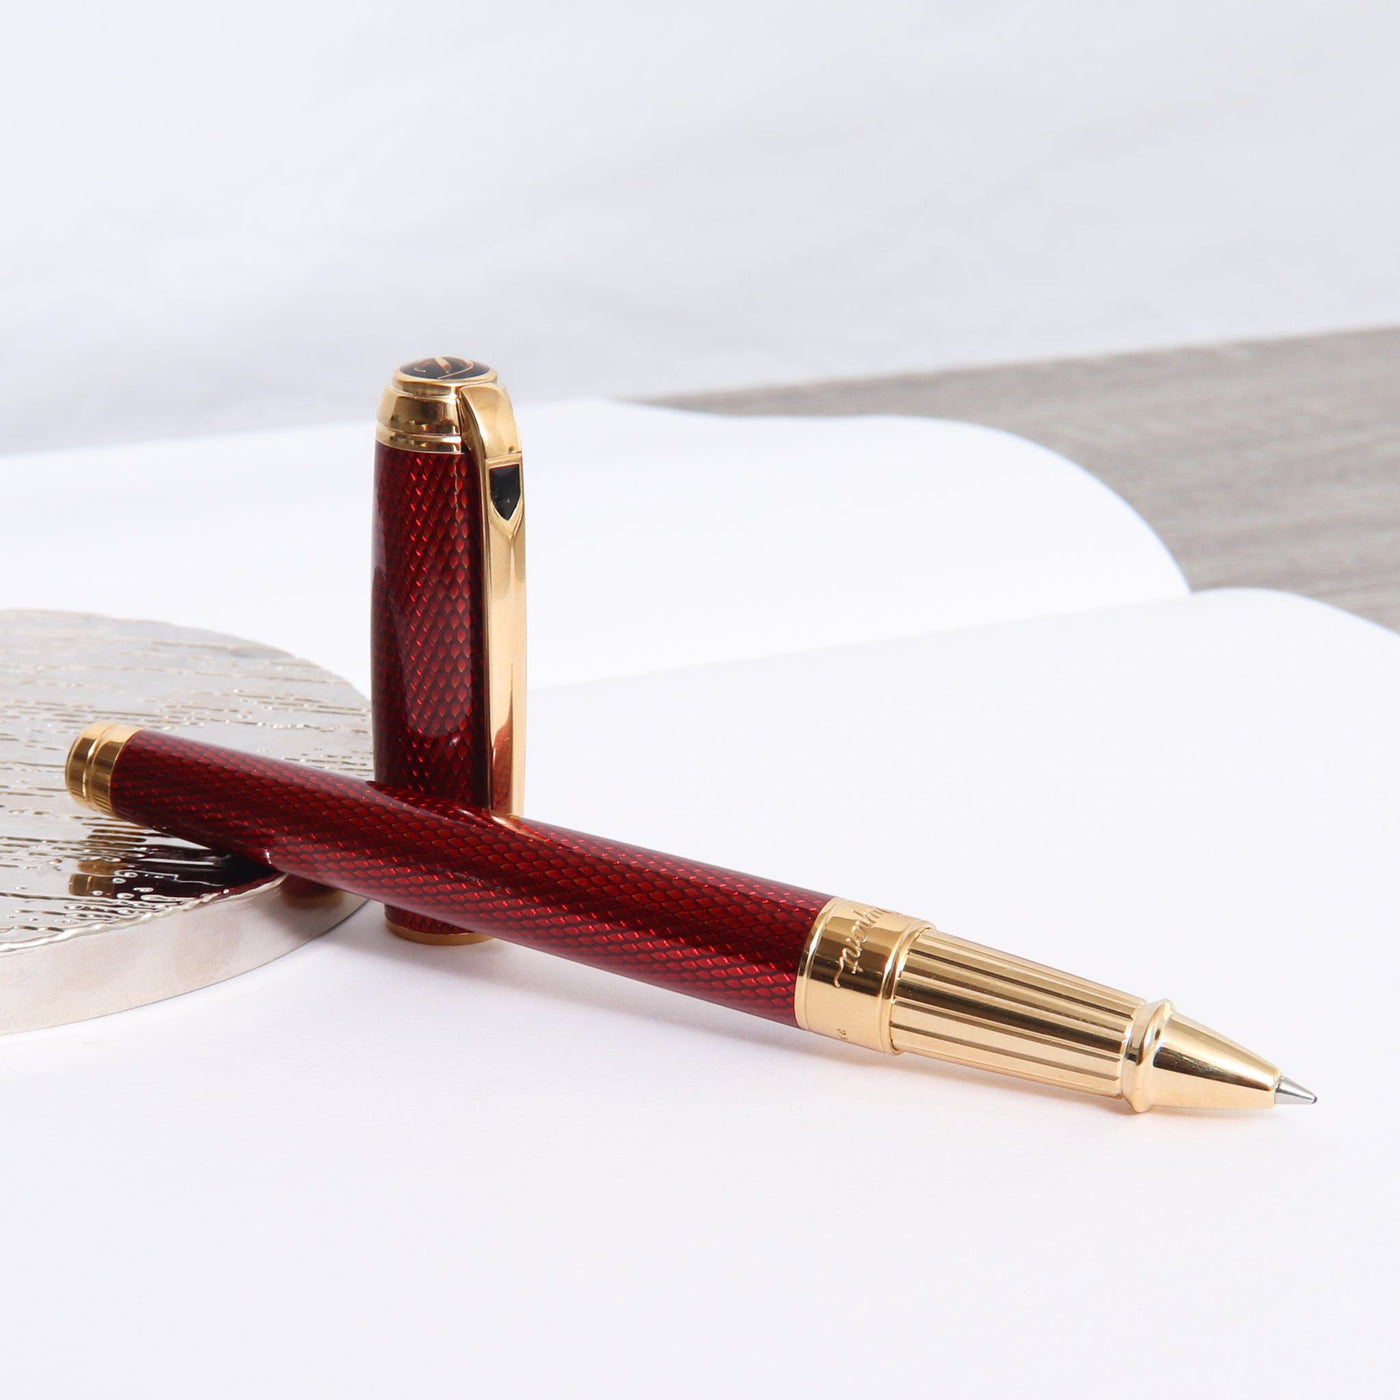 ST Dupont Line D Large Diamond Guilloche Ruby Rollerball Pen Uncapped